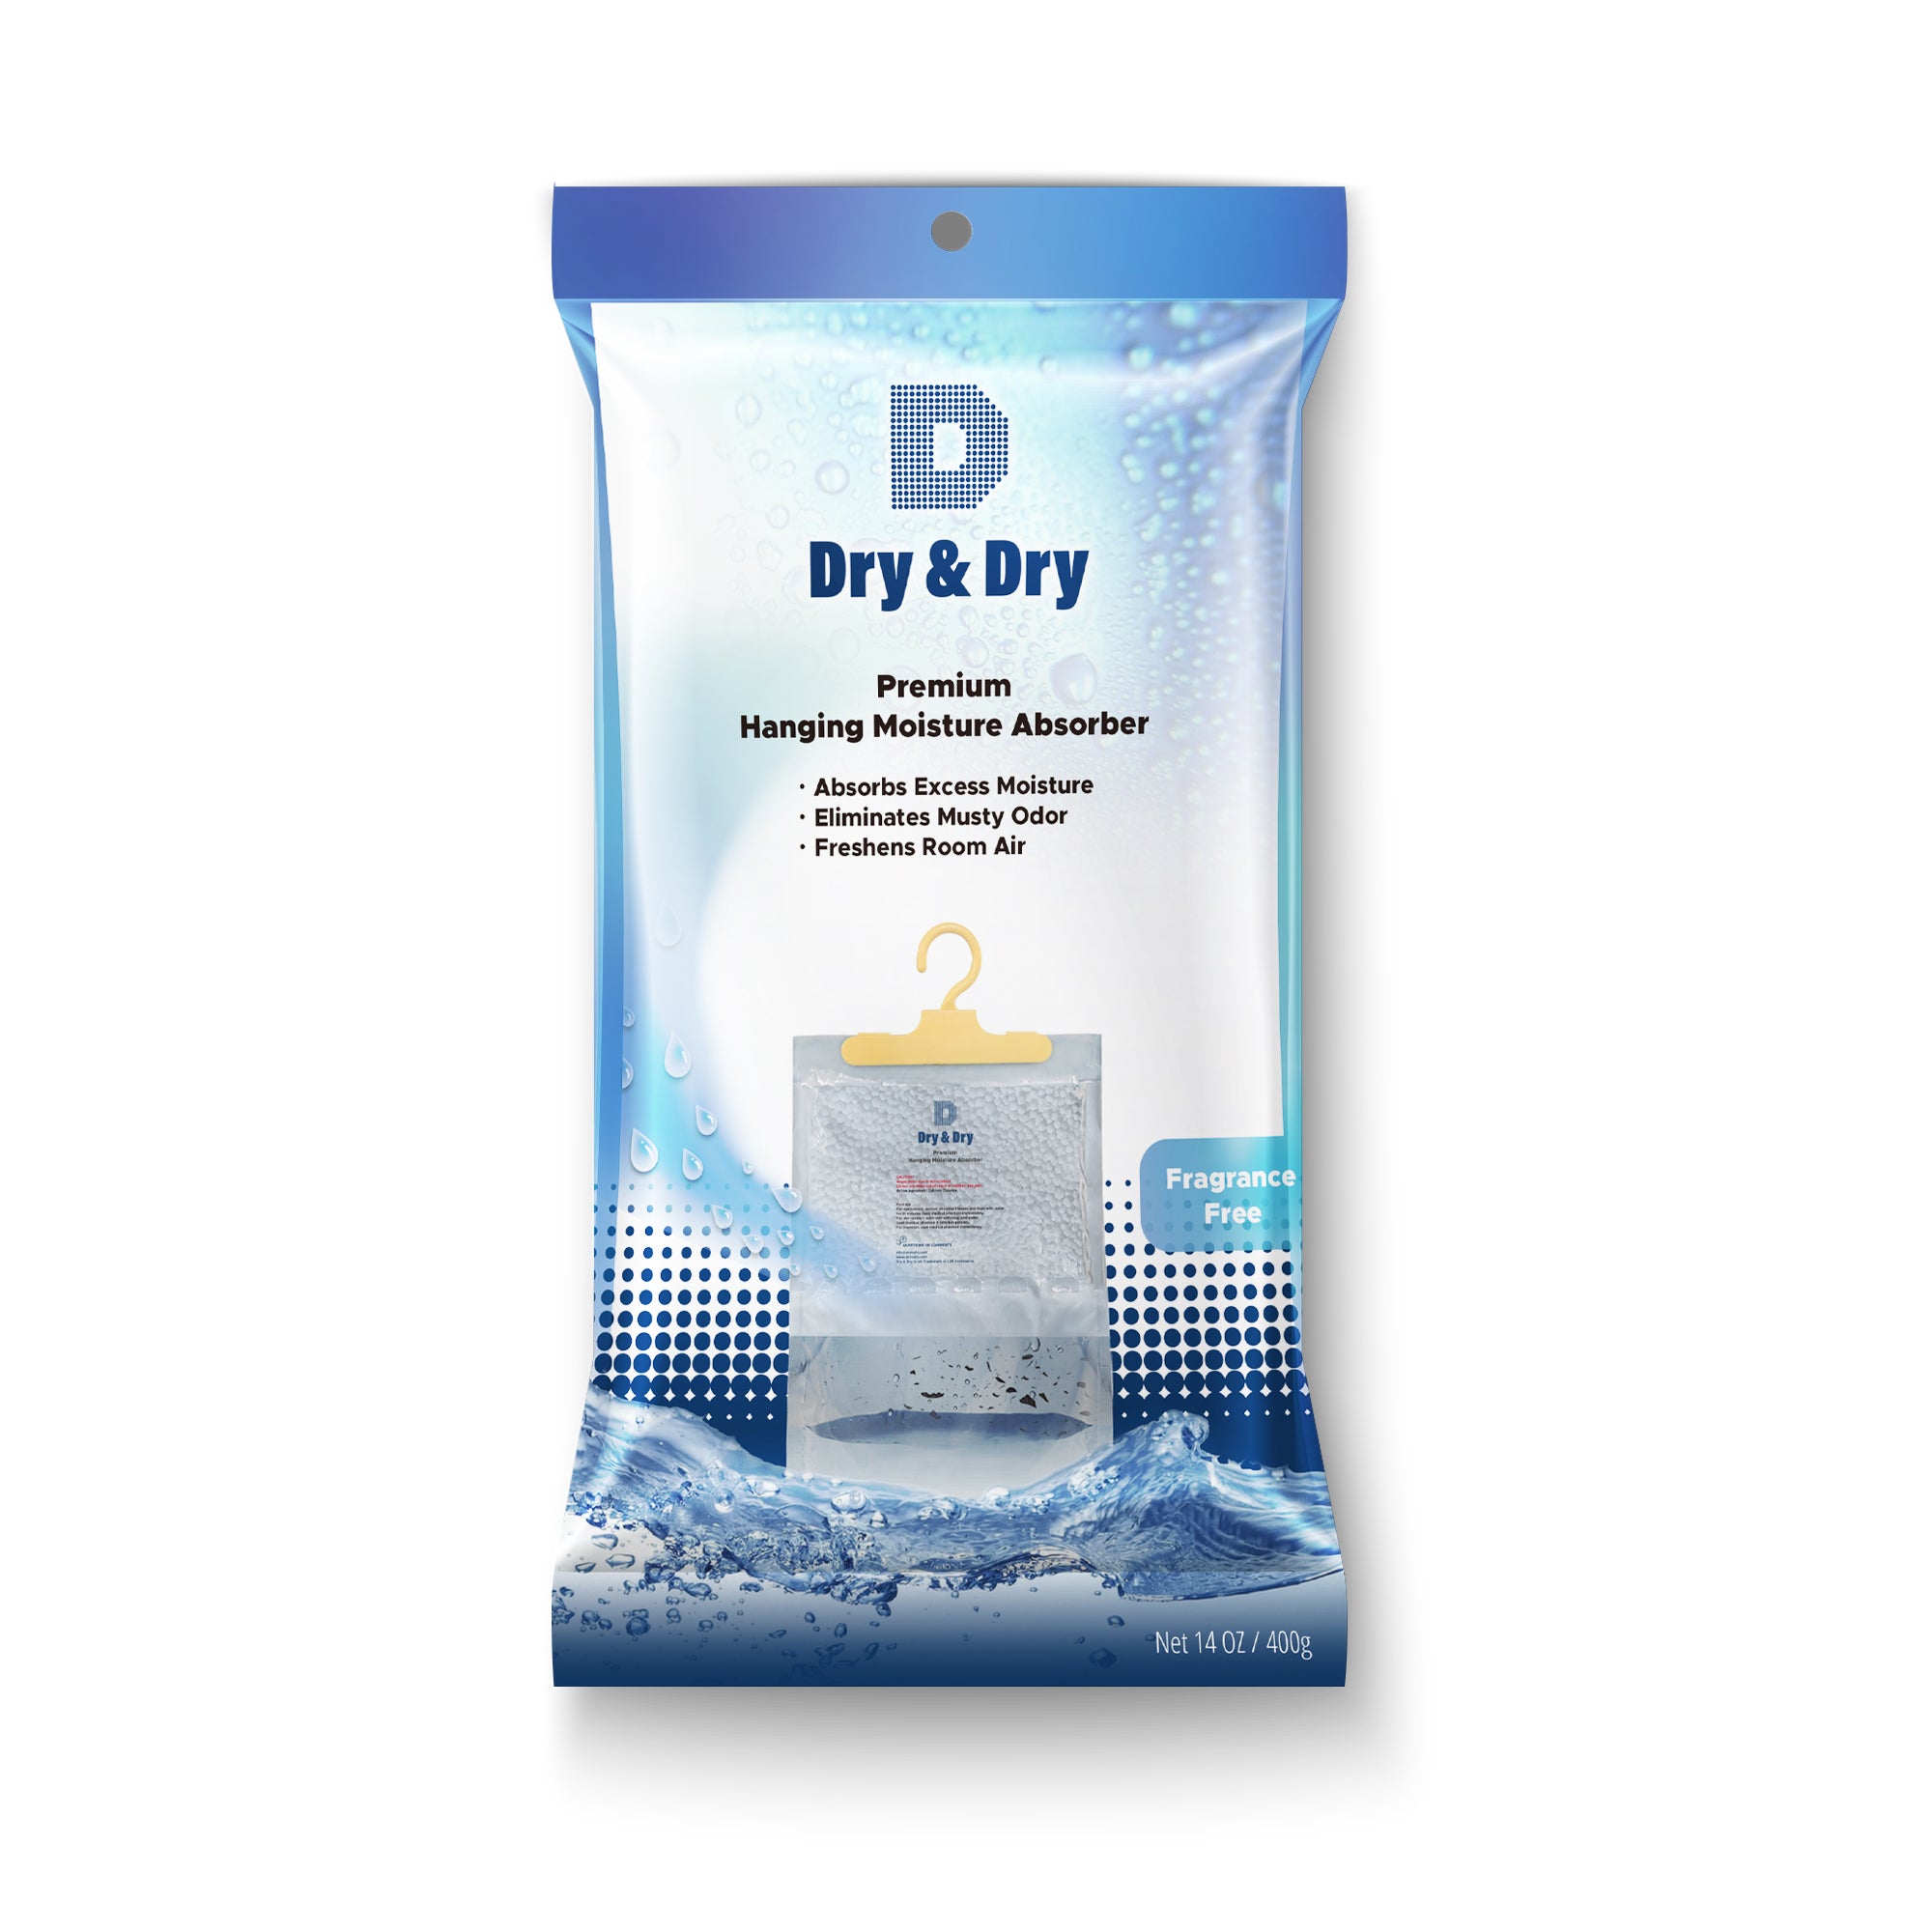 [46 pack] [Net 14.1 oz/Pack] “Dry & Dry” Premium Hanging Moisture Absorber to Control Excess Moisture for Basements, Bathrooms, Laundry Rooms, and Enclosed Spaces